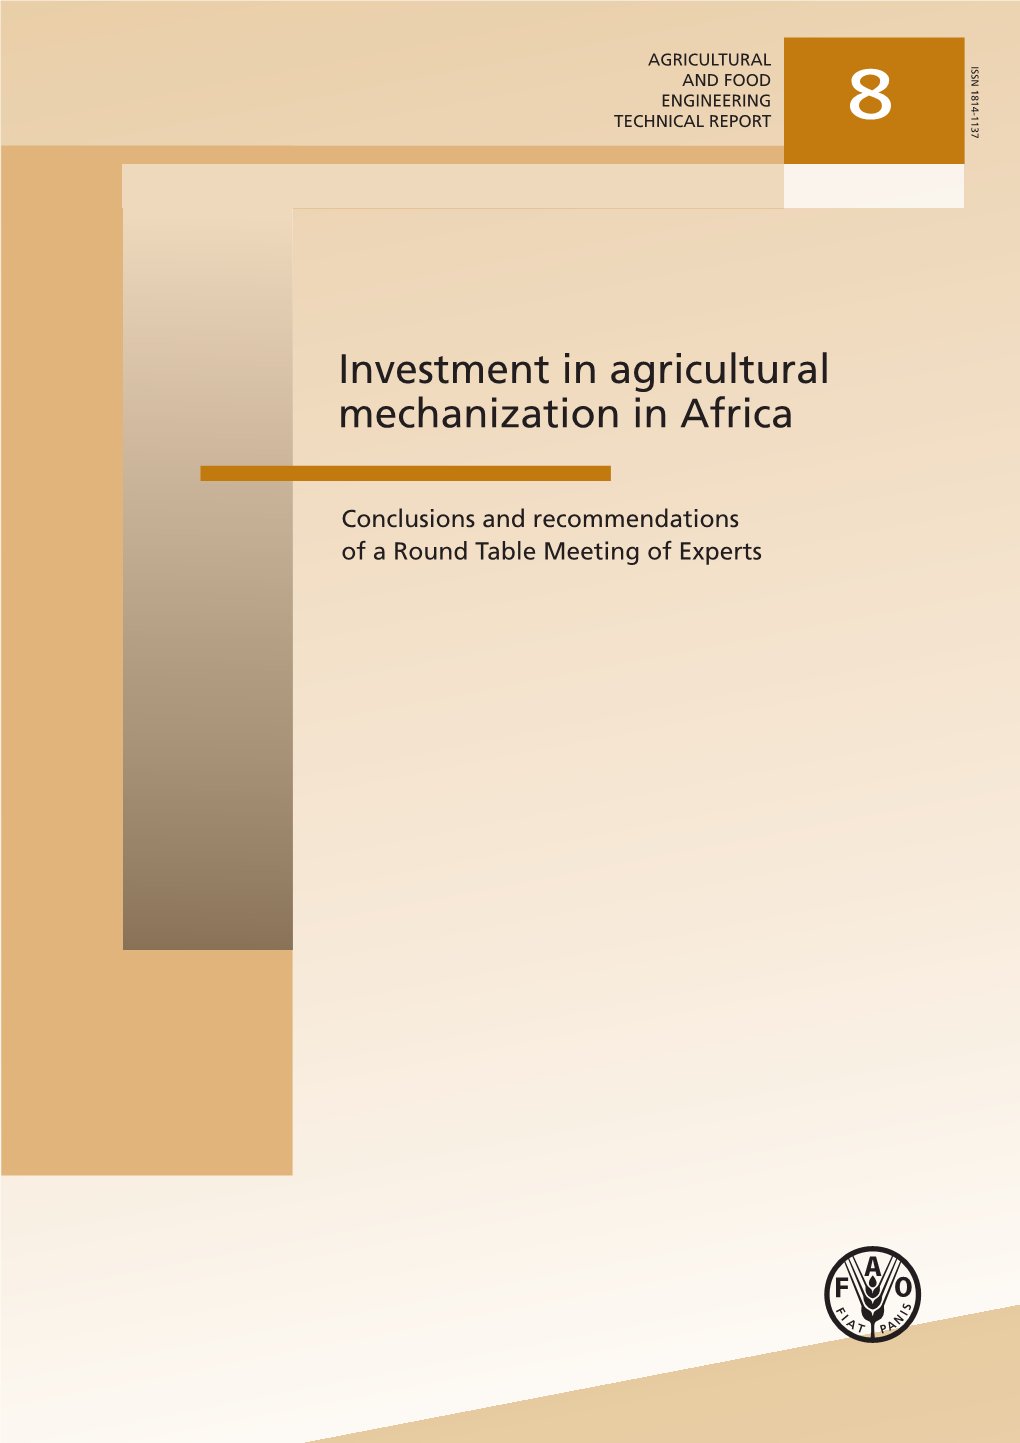 Investment in Agricultural Mechanization in Africa